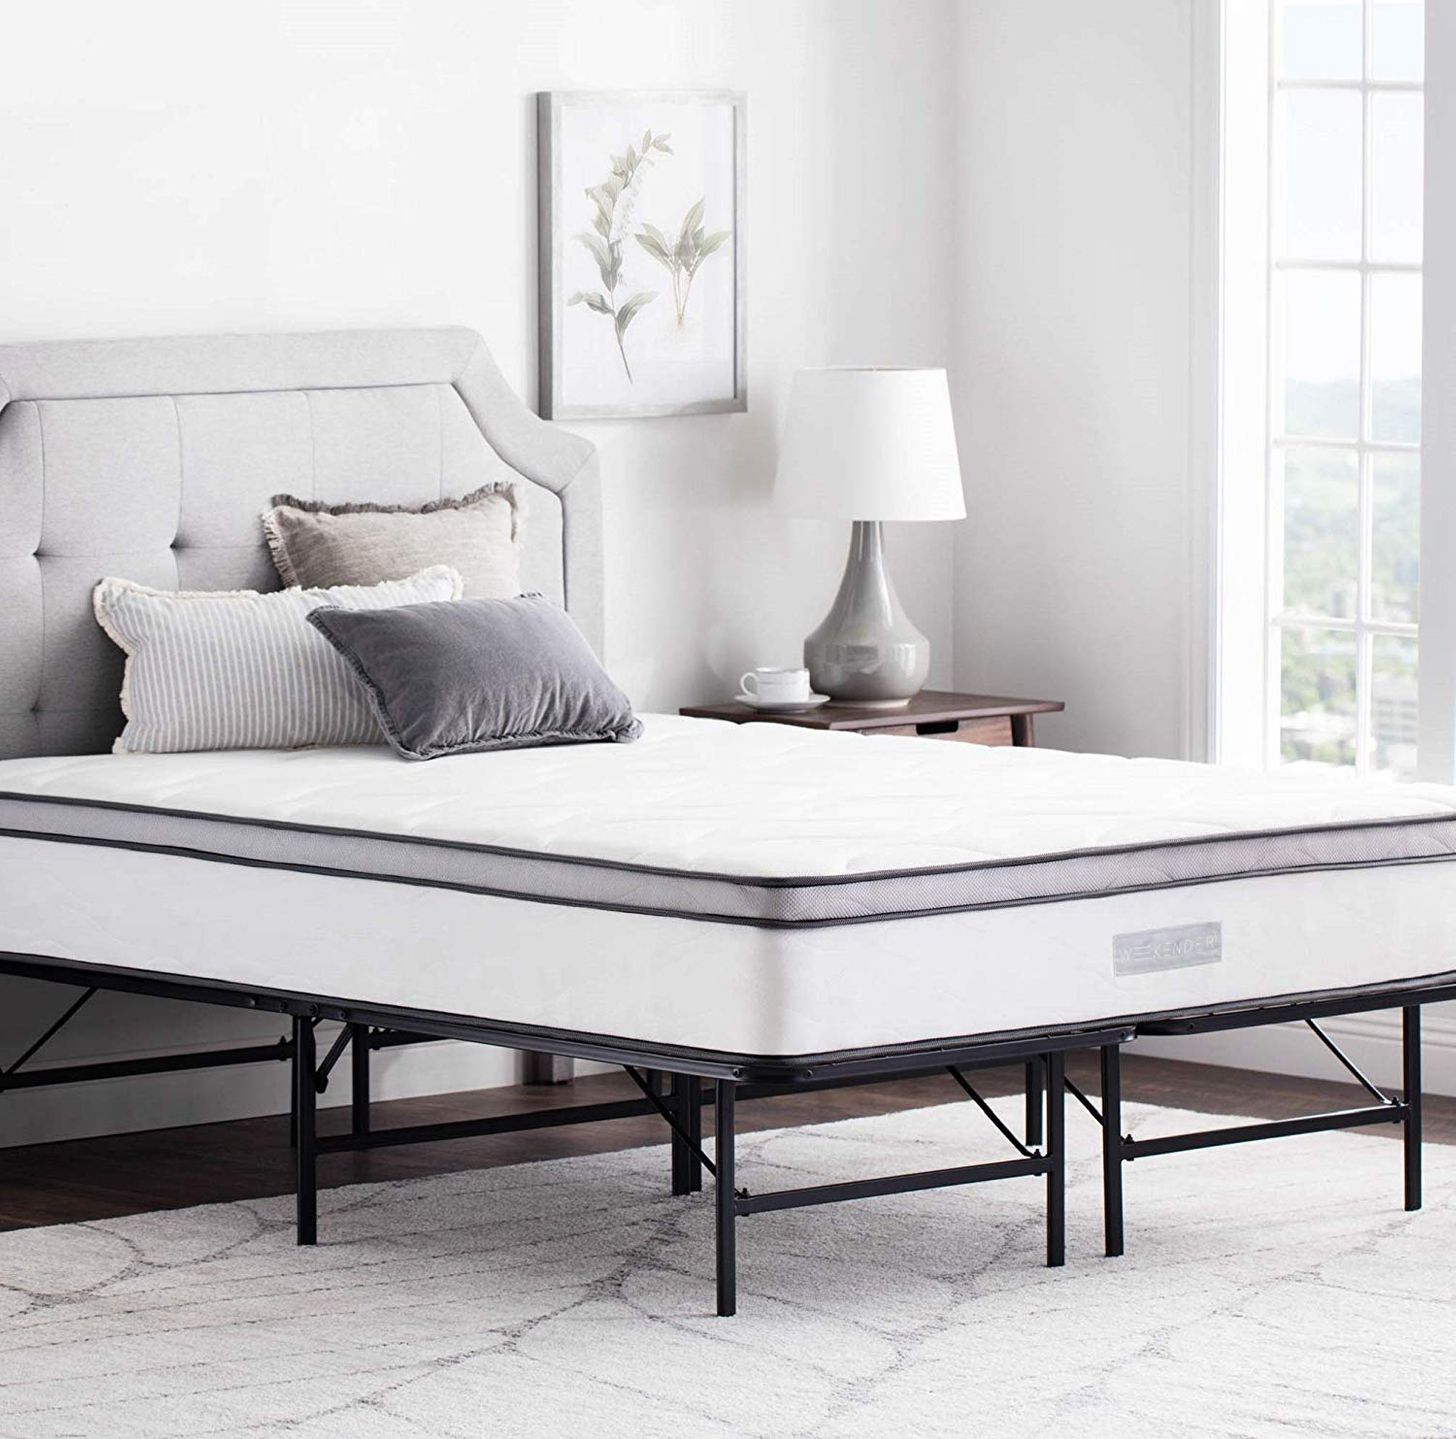 19 Best Metal Bed Frames 2020 The, King Bed Without Box Spring